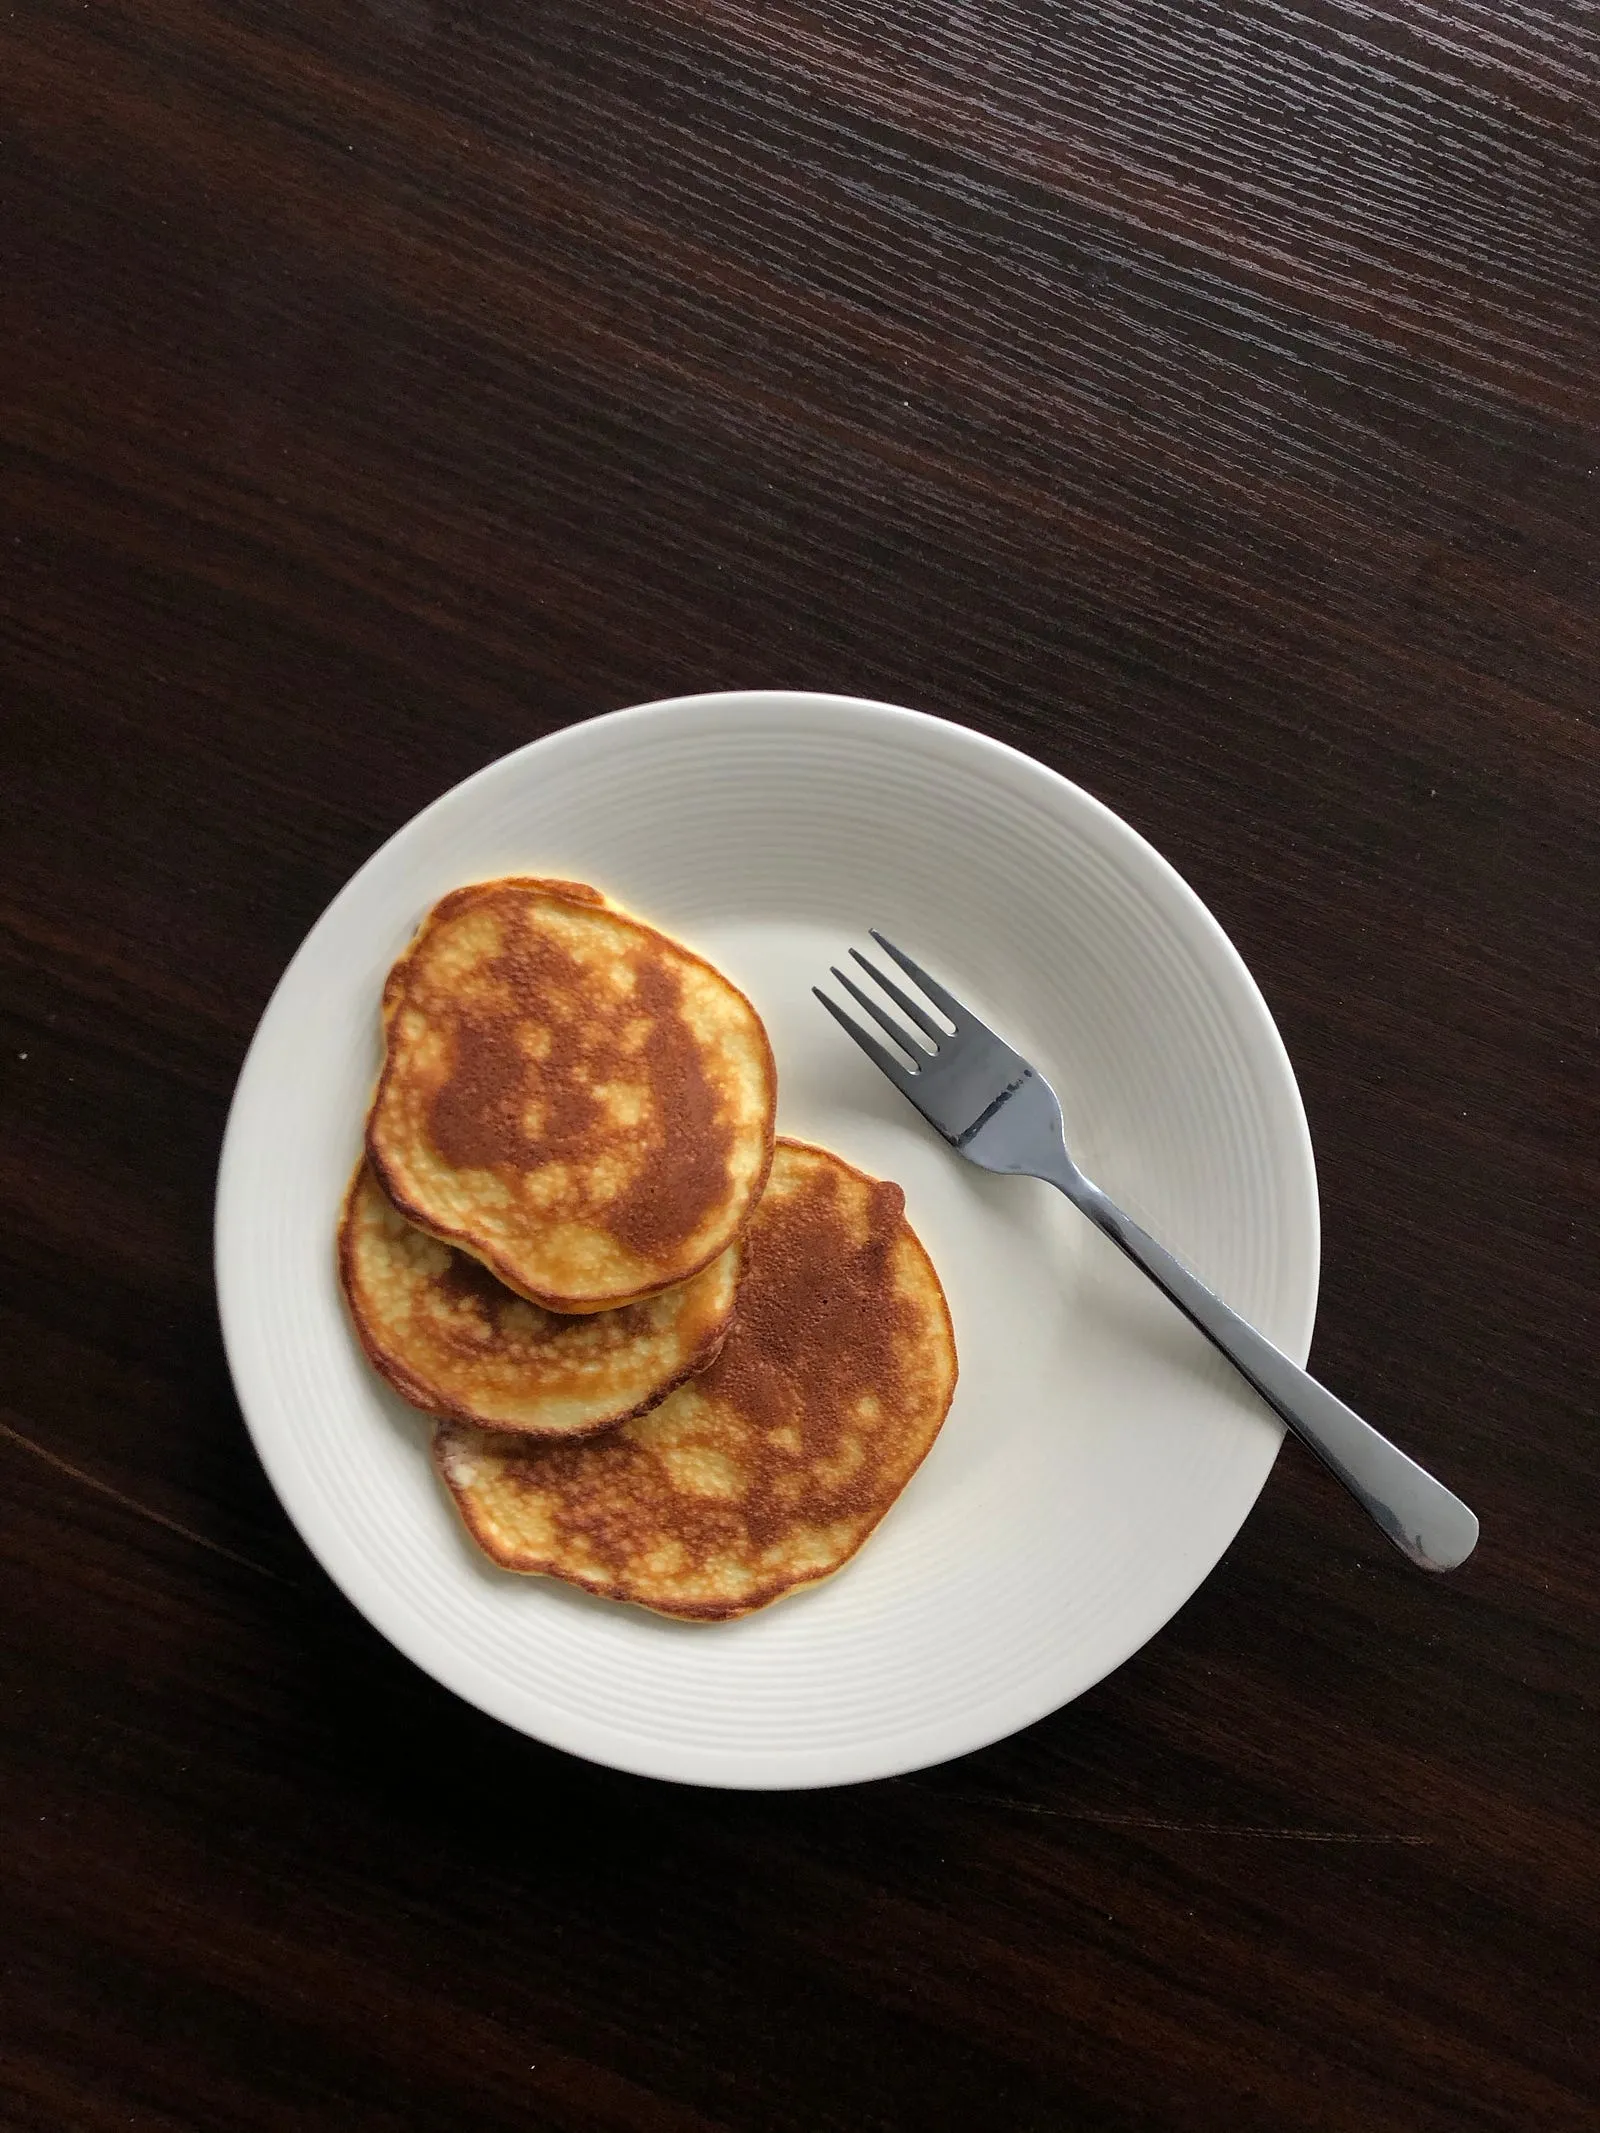 Pancake made with Eggs, Almond flour, cream, coconut flour, baking powder and vanilla extract.